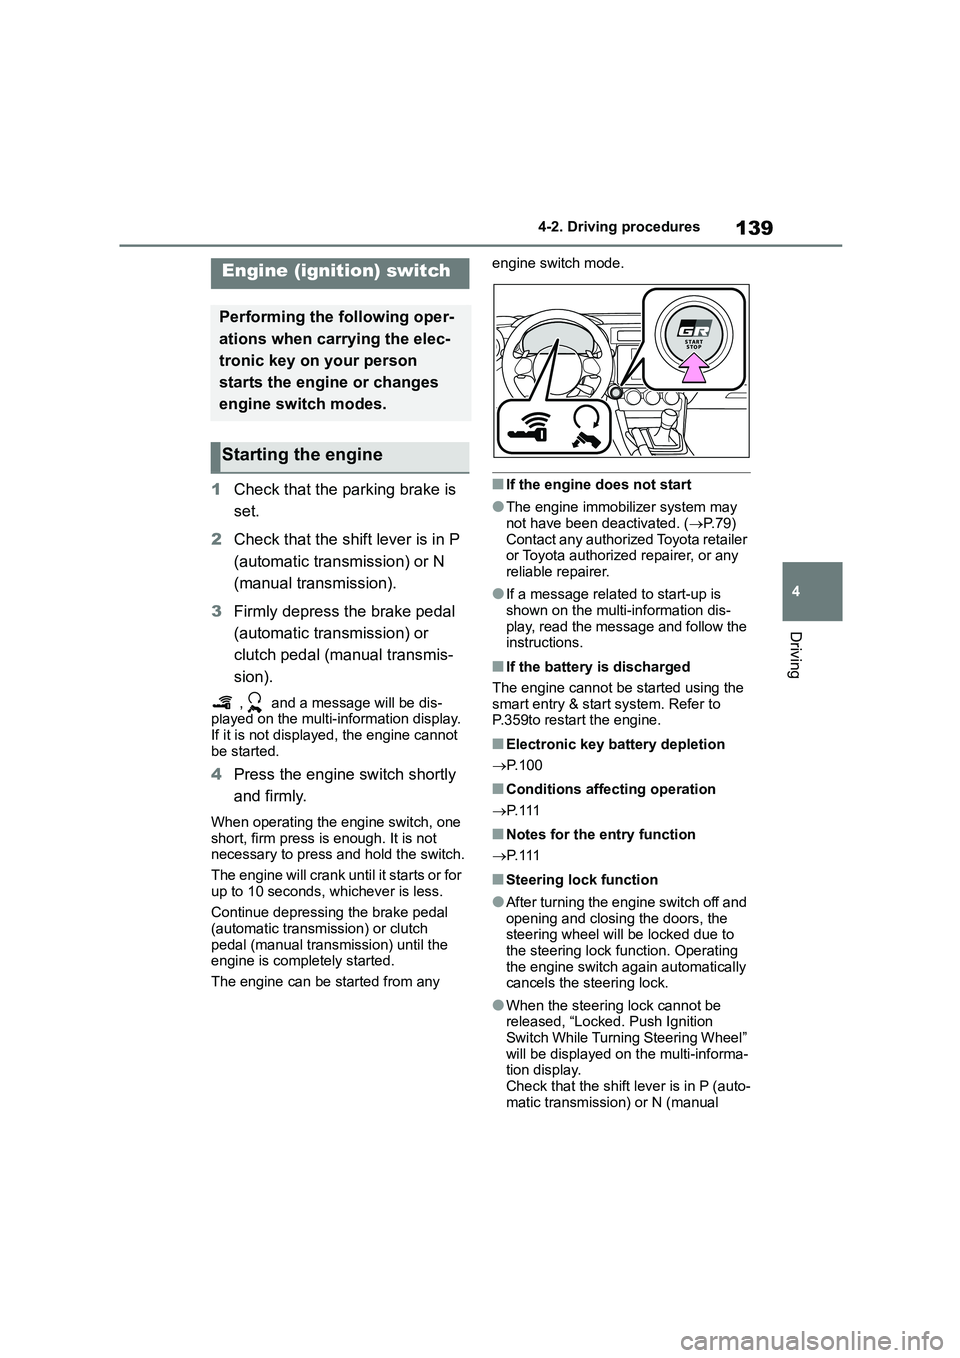 TOYOTA GR86 2022  Owners Manual (in English) 139
4 
4-2. Driving procedures
Driving
4-2.Driving procedures
1 Check that the parking brake is  
set. 
2 Check that the shift lever is in P  
(automatic transmission) or N 
(manual transmission). 
3 